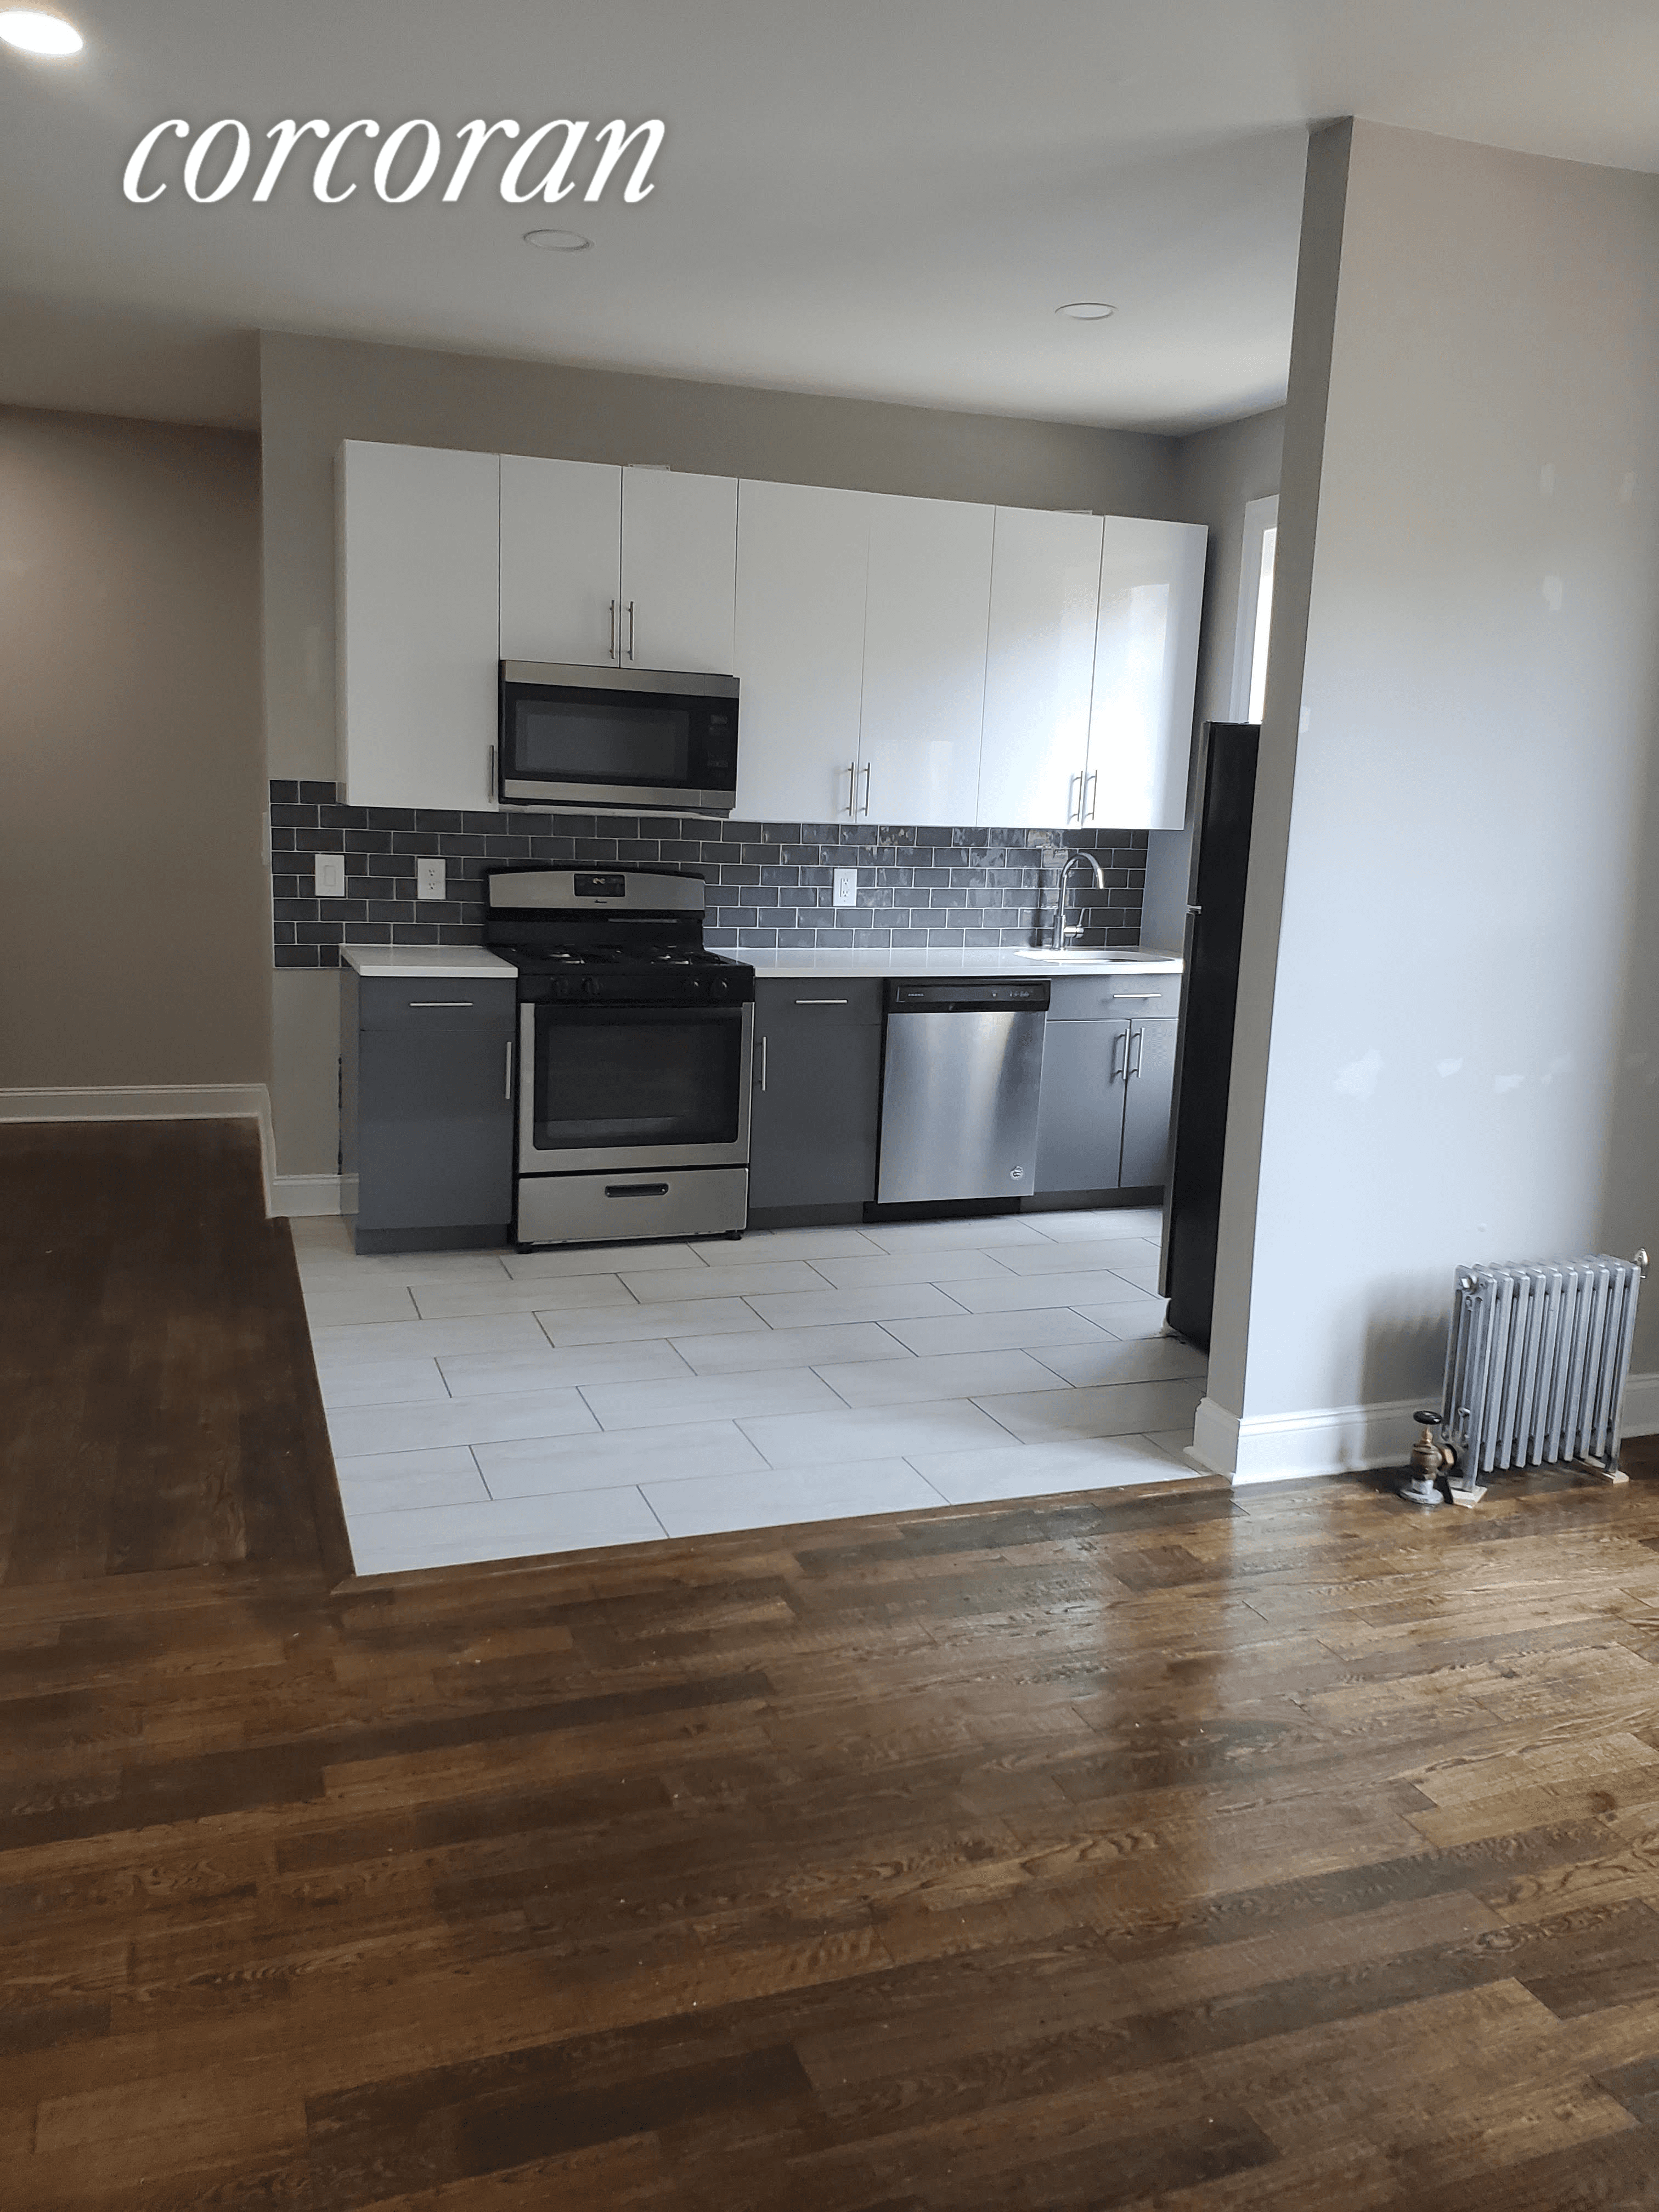 Massive 3 Bedroom with laundry Prime Location Brooklyn College location Washer and Dryer in unit 3 equal sized bedrooms